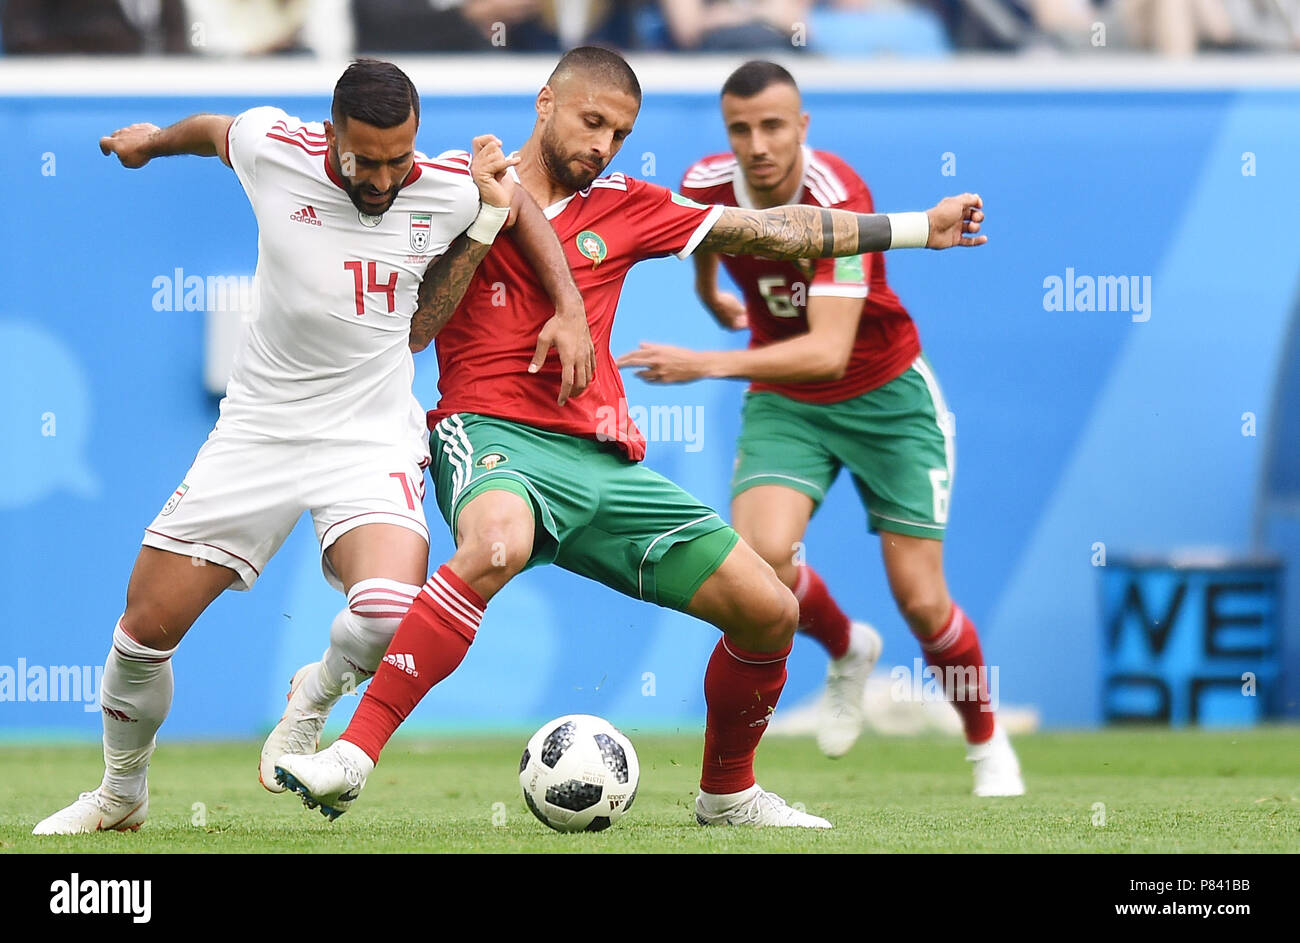 SAINT PETERSBURG, RUSSIA - JUNE 15: Saman Ghoddos of IR Iran competes with Manuel Da Costa of Morocco during the 2018 FIFA World Cup Russia group B match between Morocco and Iran at Saint Petersburg Stadium on June 15, 2018 in Saint Petersburg, Russia. (Photo by Lukasz Laskowski/PressFocus/MB Media) Stock Photo